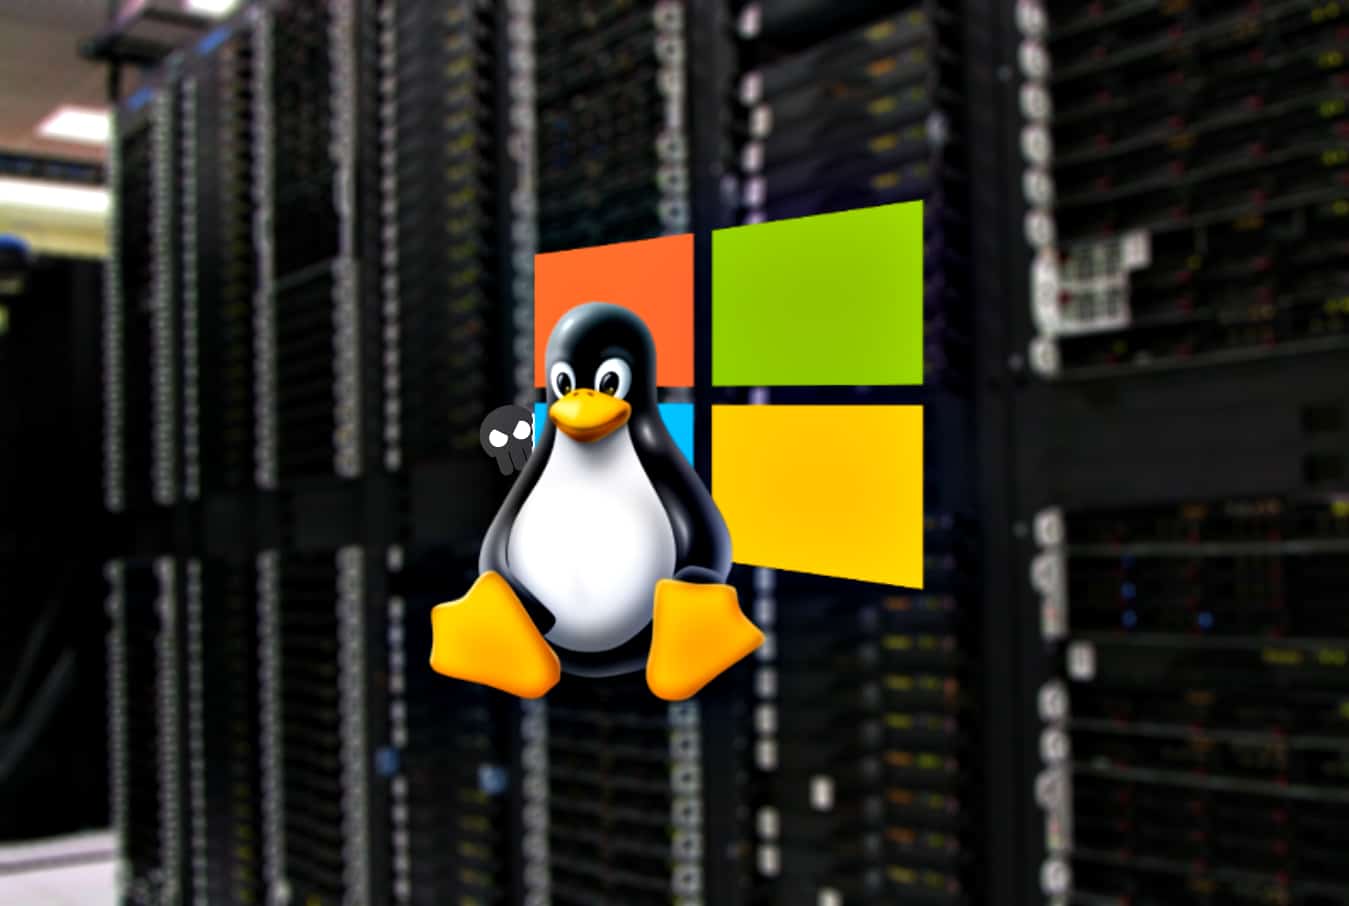 Golang malware infecting both Windows and Linux Servers